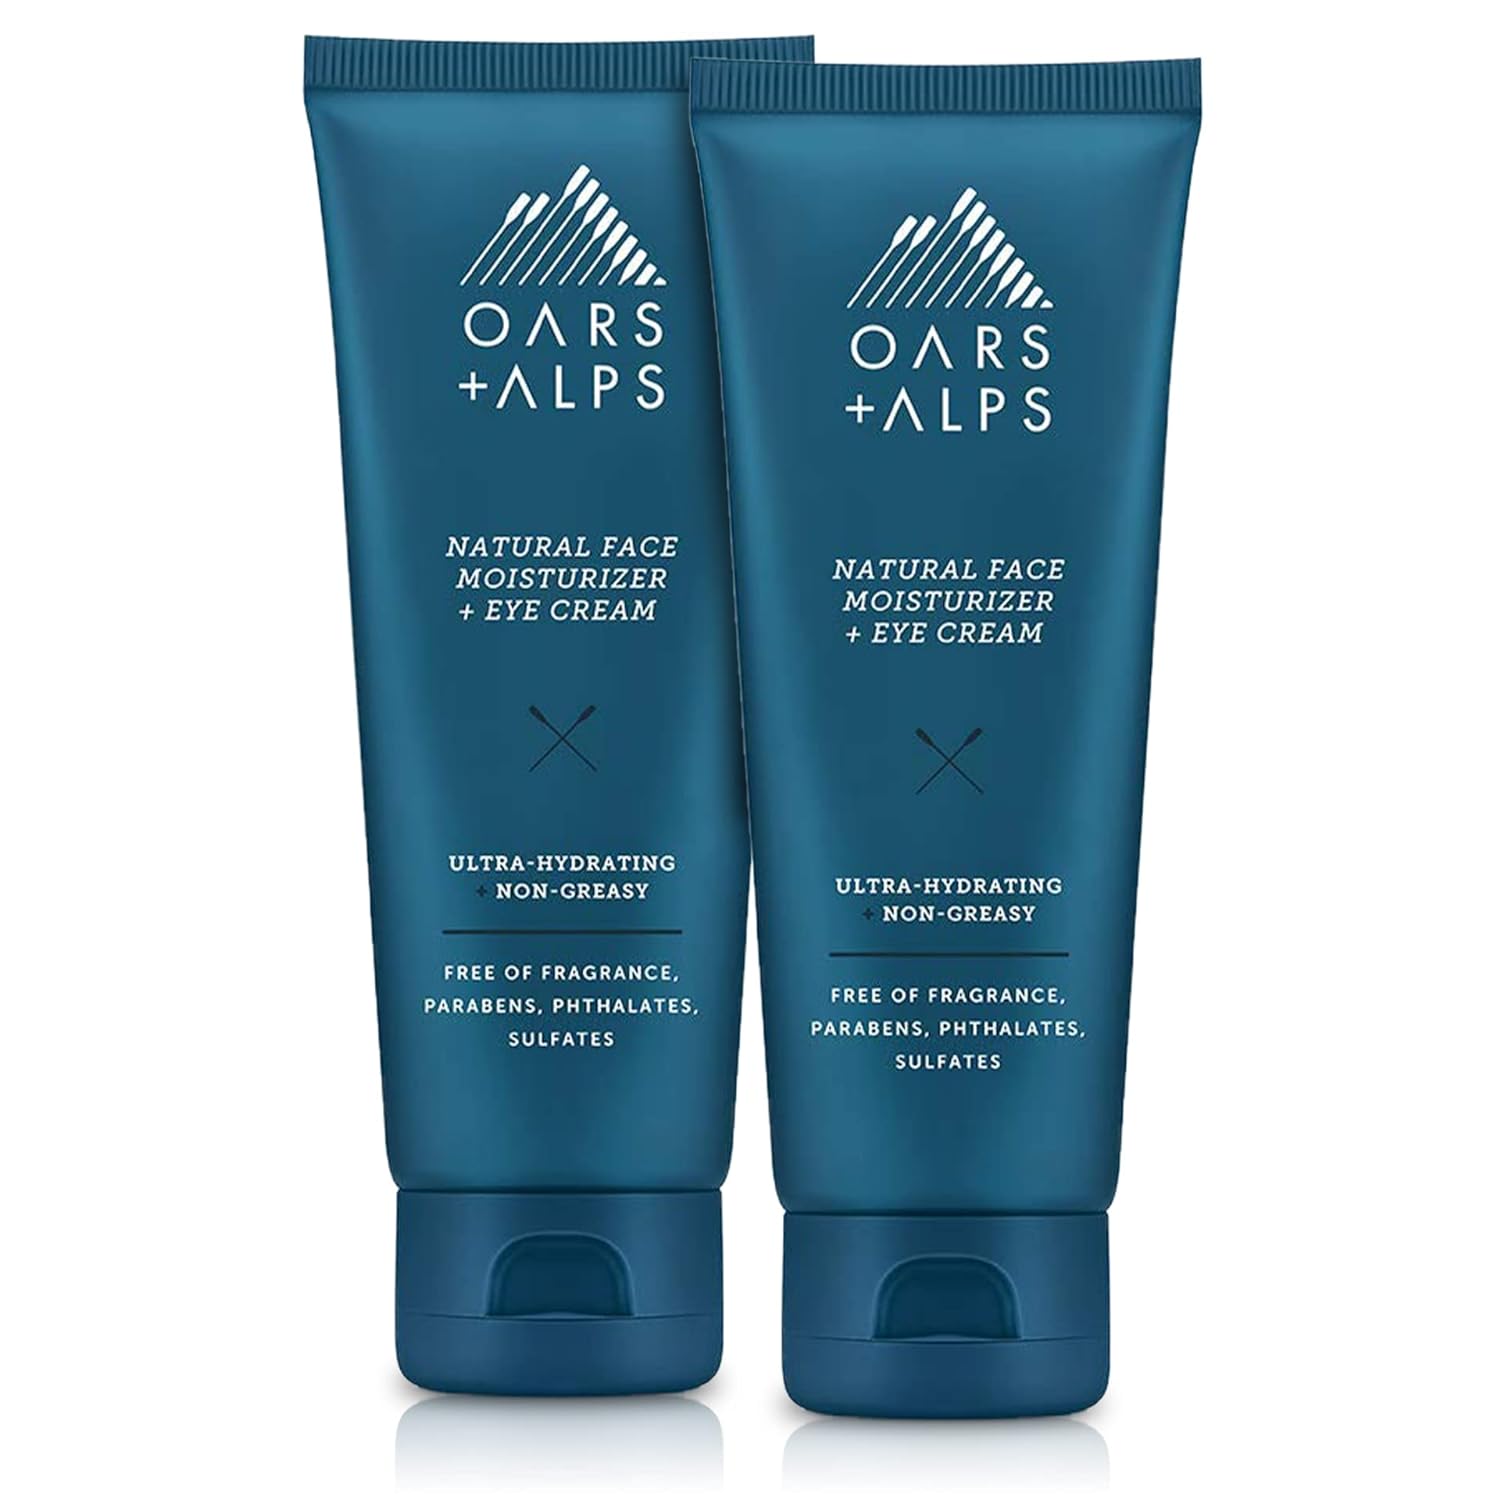 Oars + Alps Face Moisturizer and Eye Cream, Dermatologist Tested Skin Care Infused with Aloe Leaf Juice and Vitamin E, Travel Size, 2.5 Fl Oz, 2 Pack